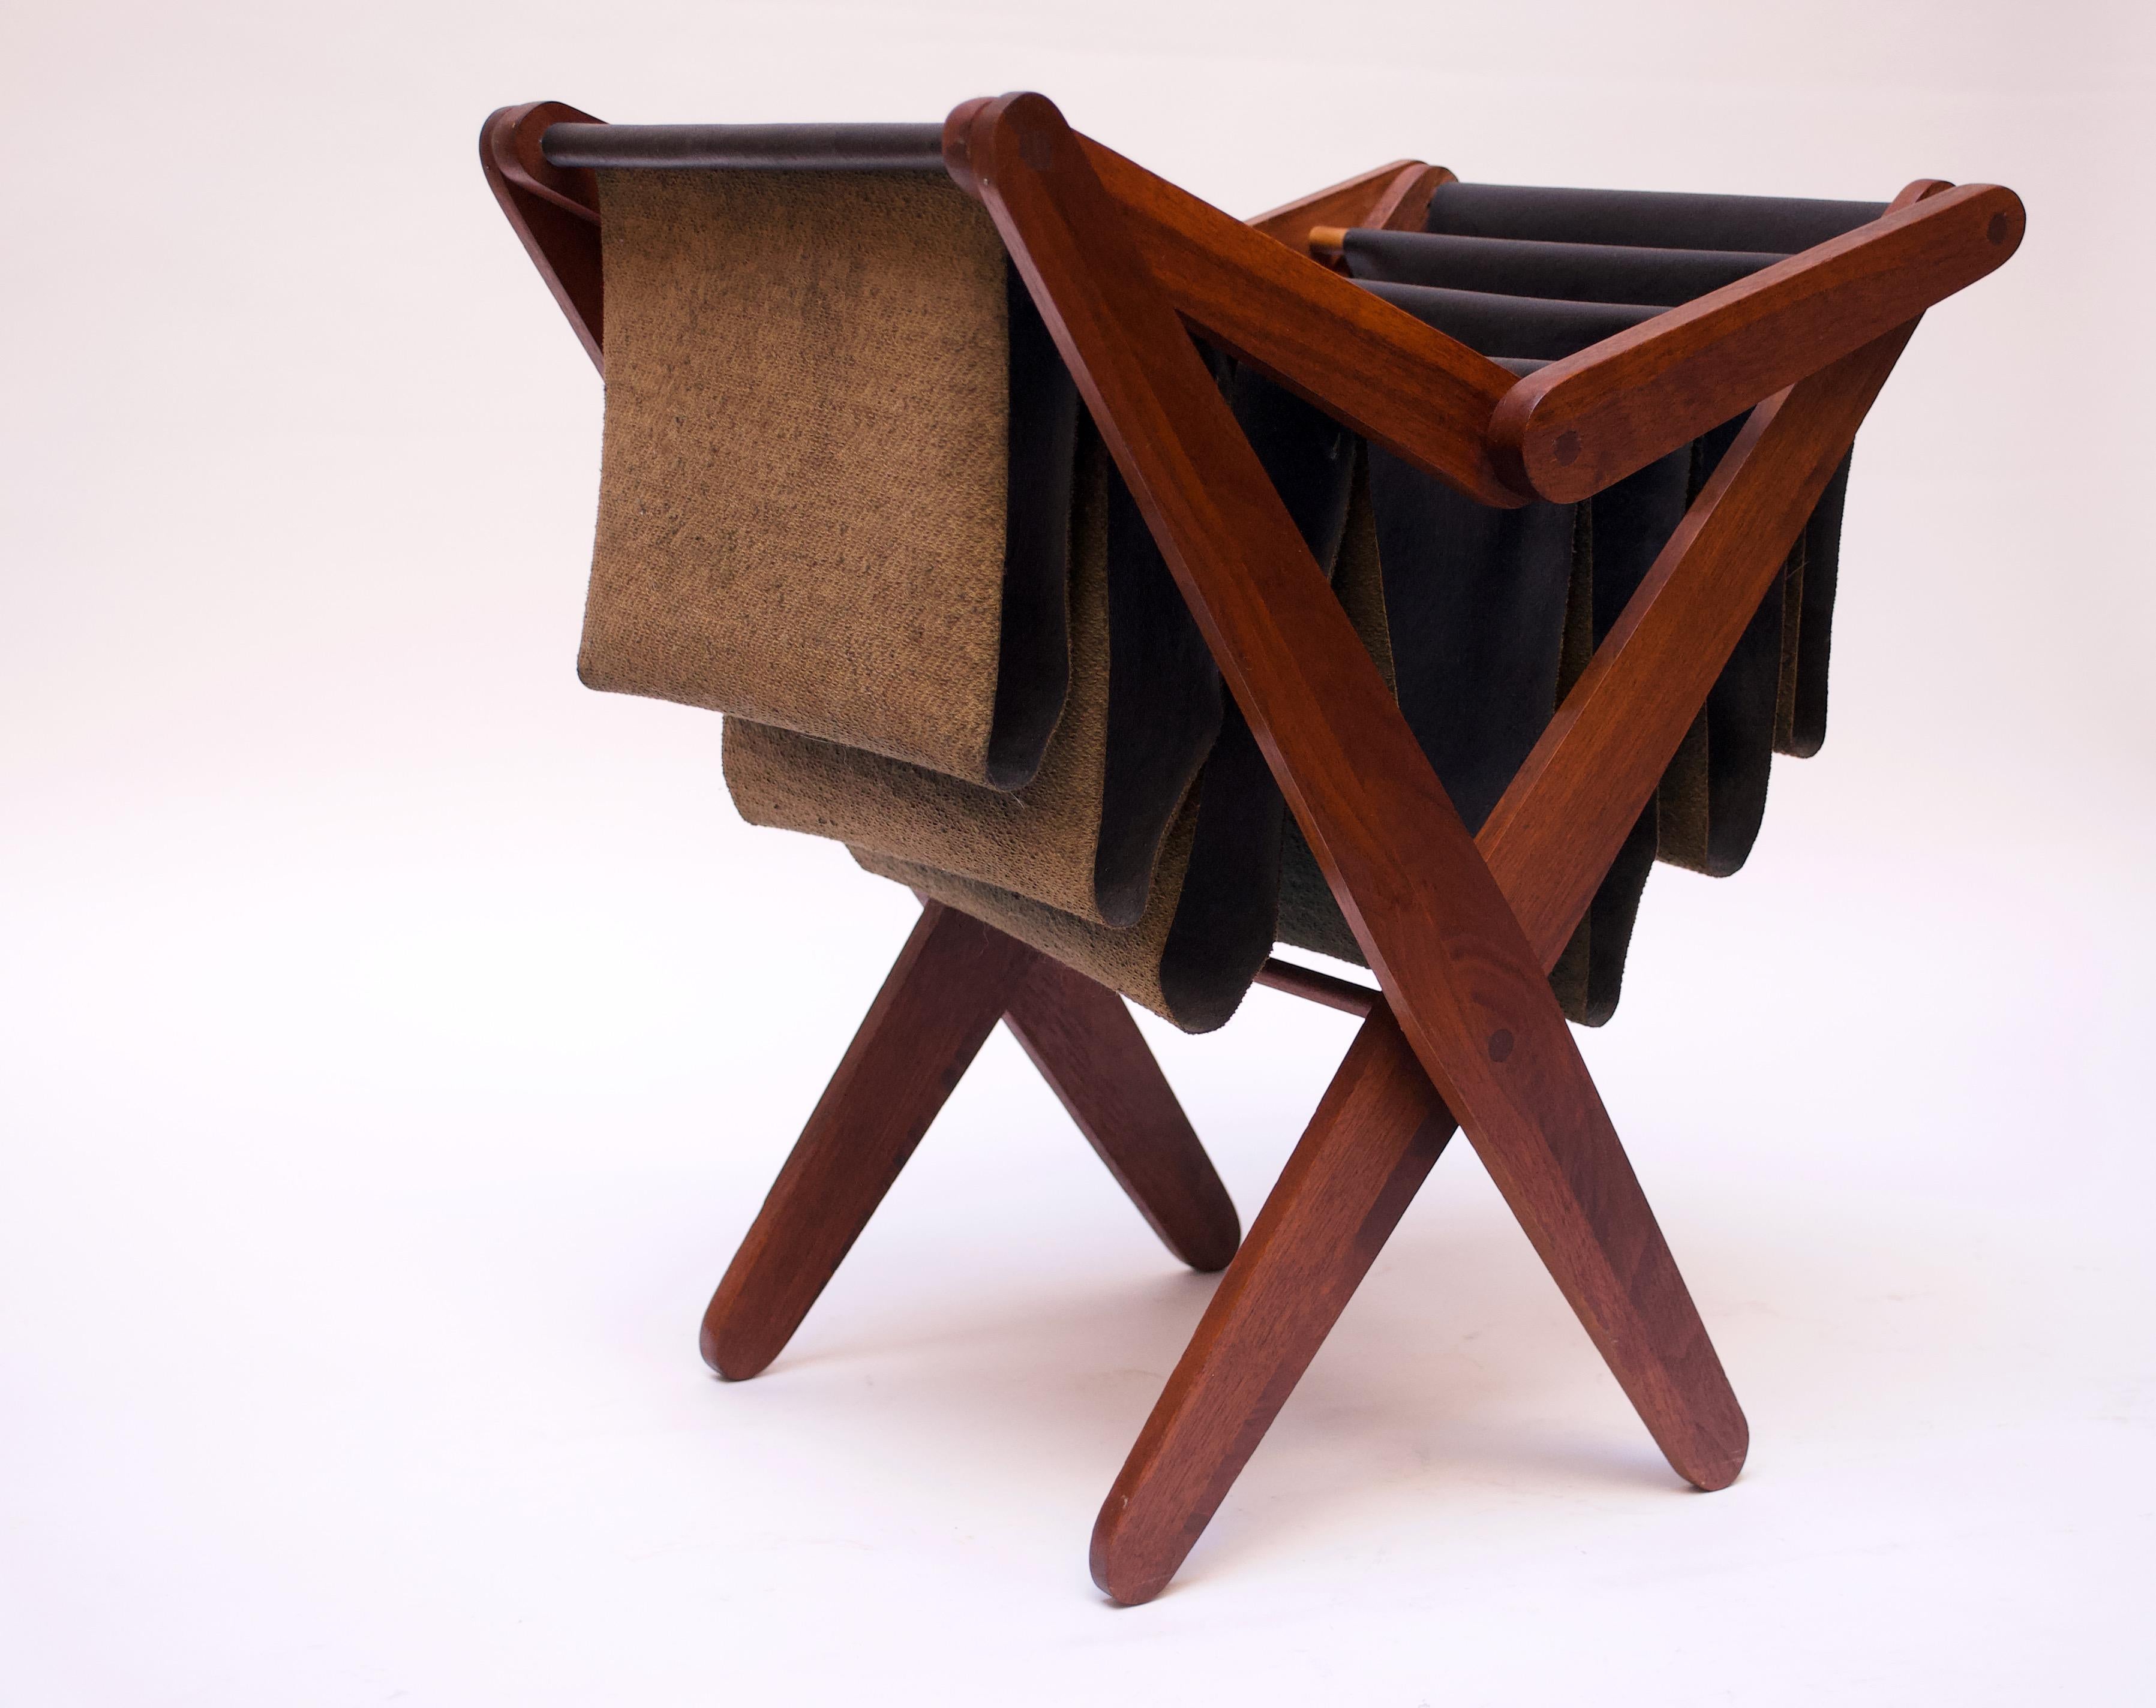 Attractive Henry P. Glass magazine rack with sculpted walnut legs assembled using sophisticated wood joinery techniques (circular joints). Slots are made of Naugahyde (original to the design).
Despite its appearance, the piece is not totally